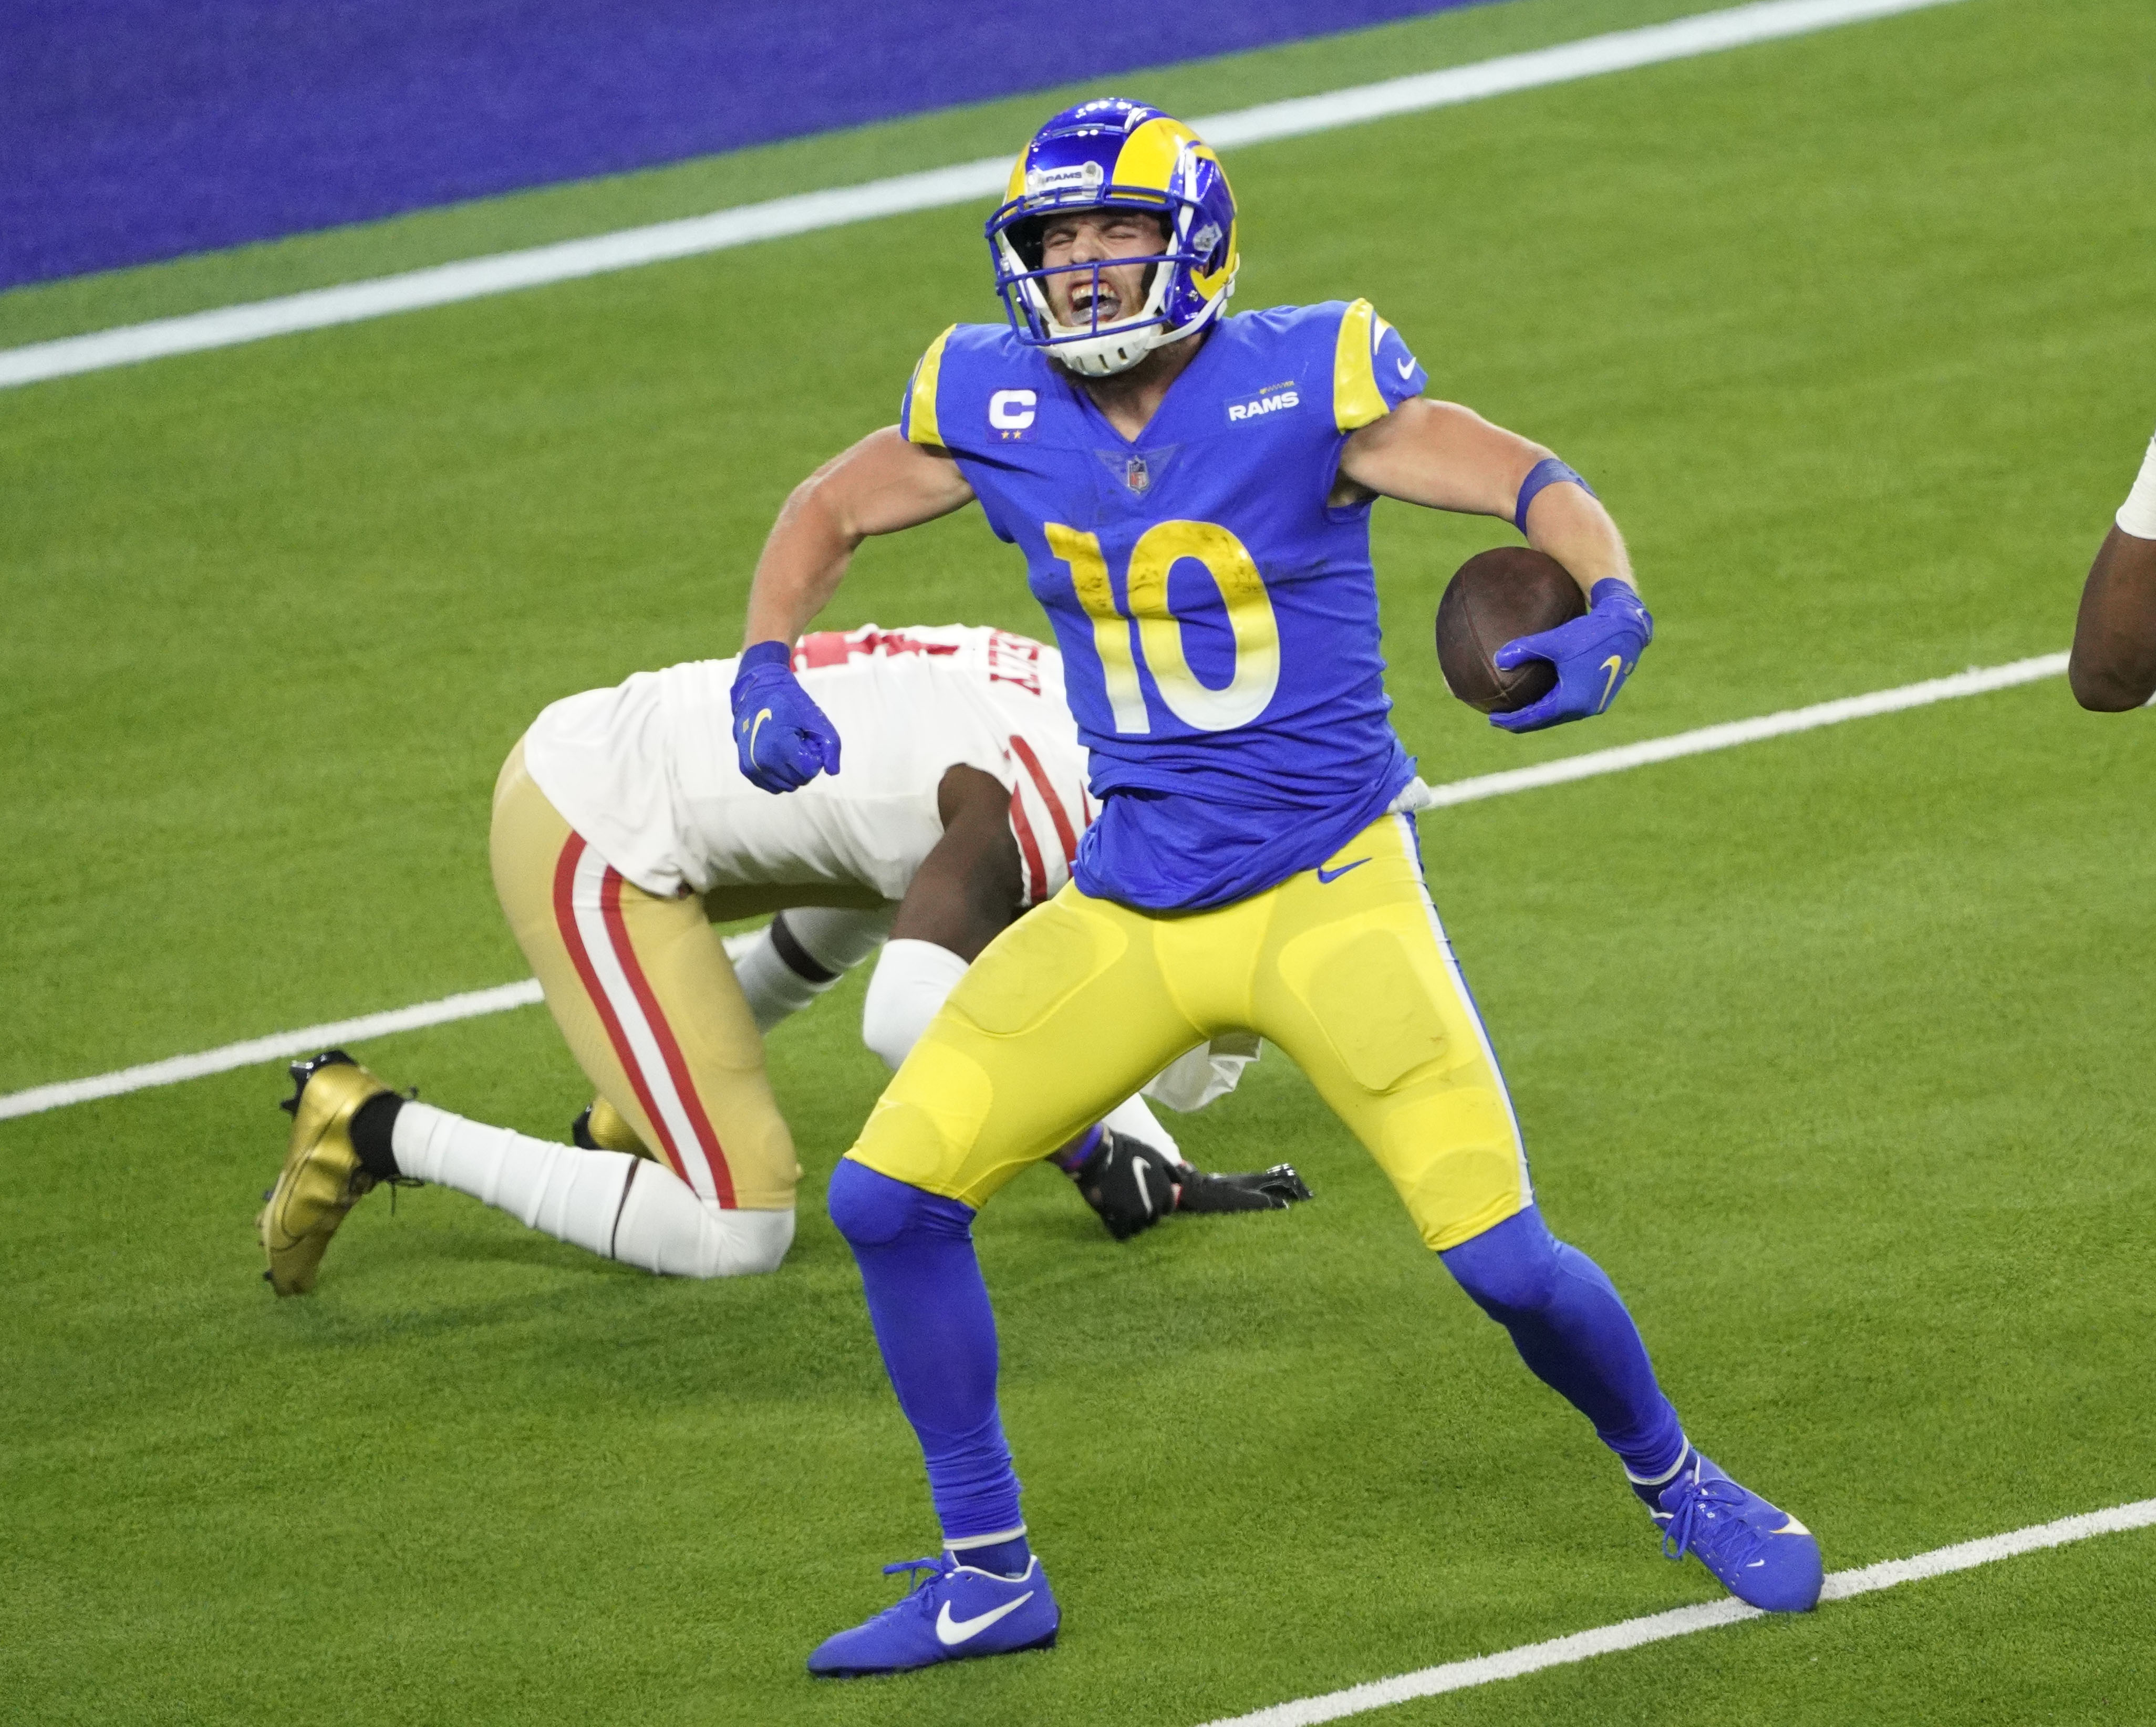 NFL: JAN 30 NFC Conference Championship - 49ers at Rams